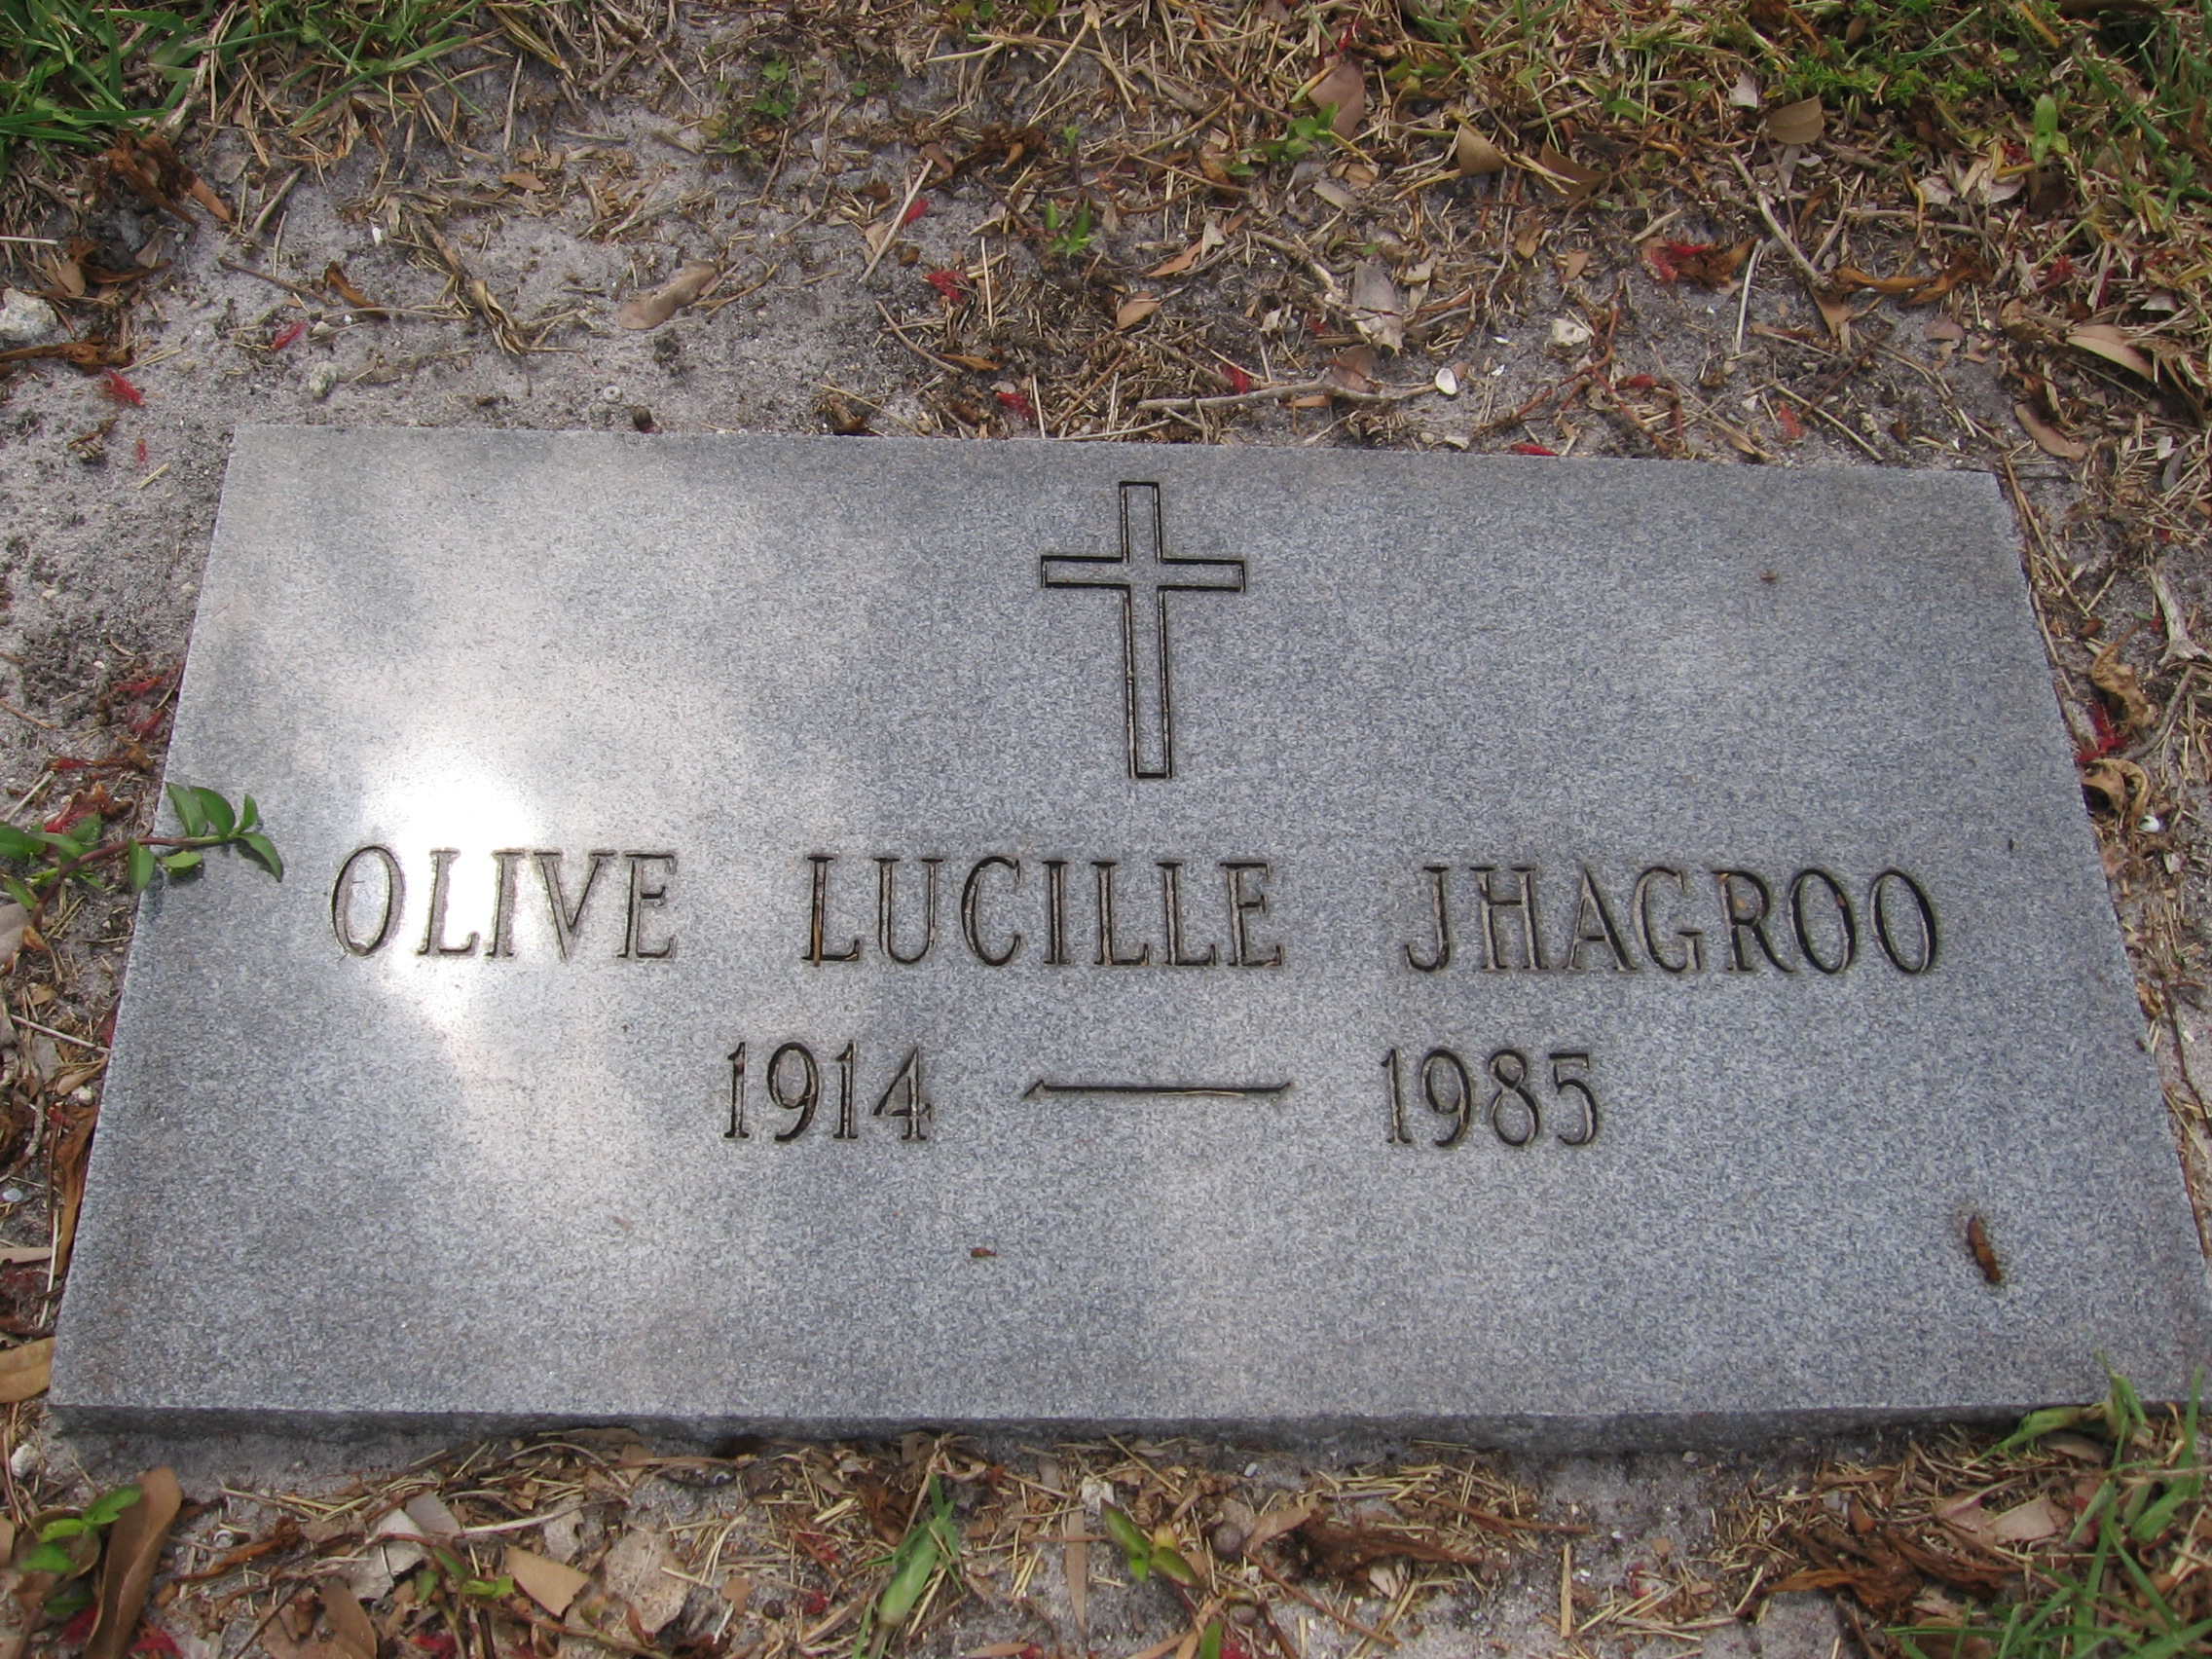 Olive Lucille Jhagroo